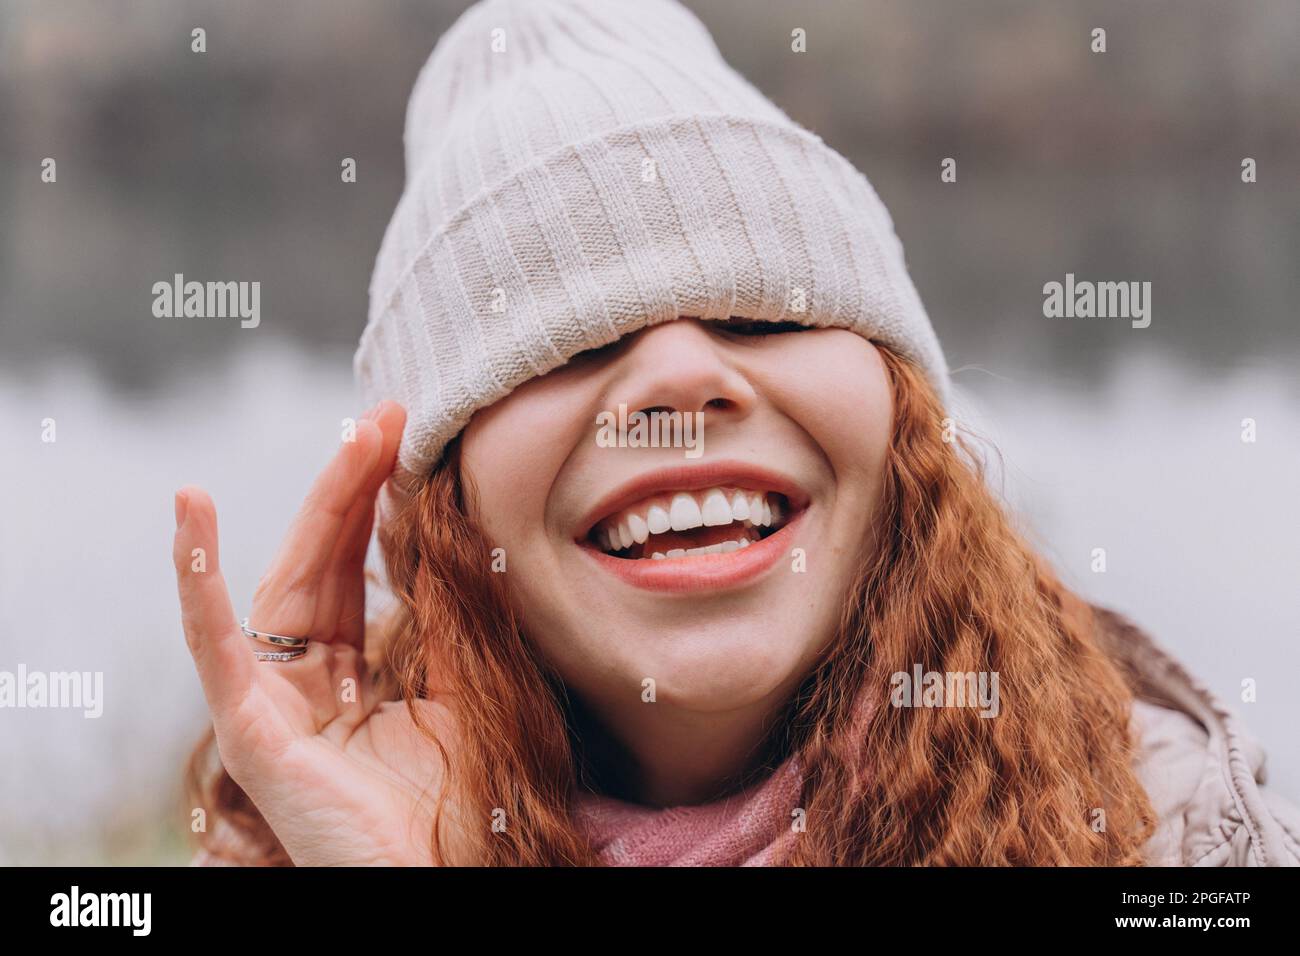 Curly redhead woman 30-35 with a cap over her eyes laughs Stock Photo